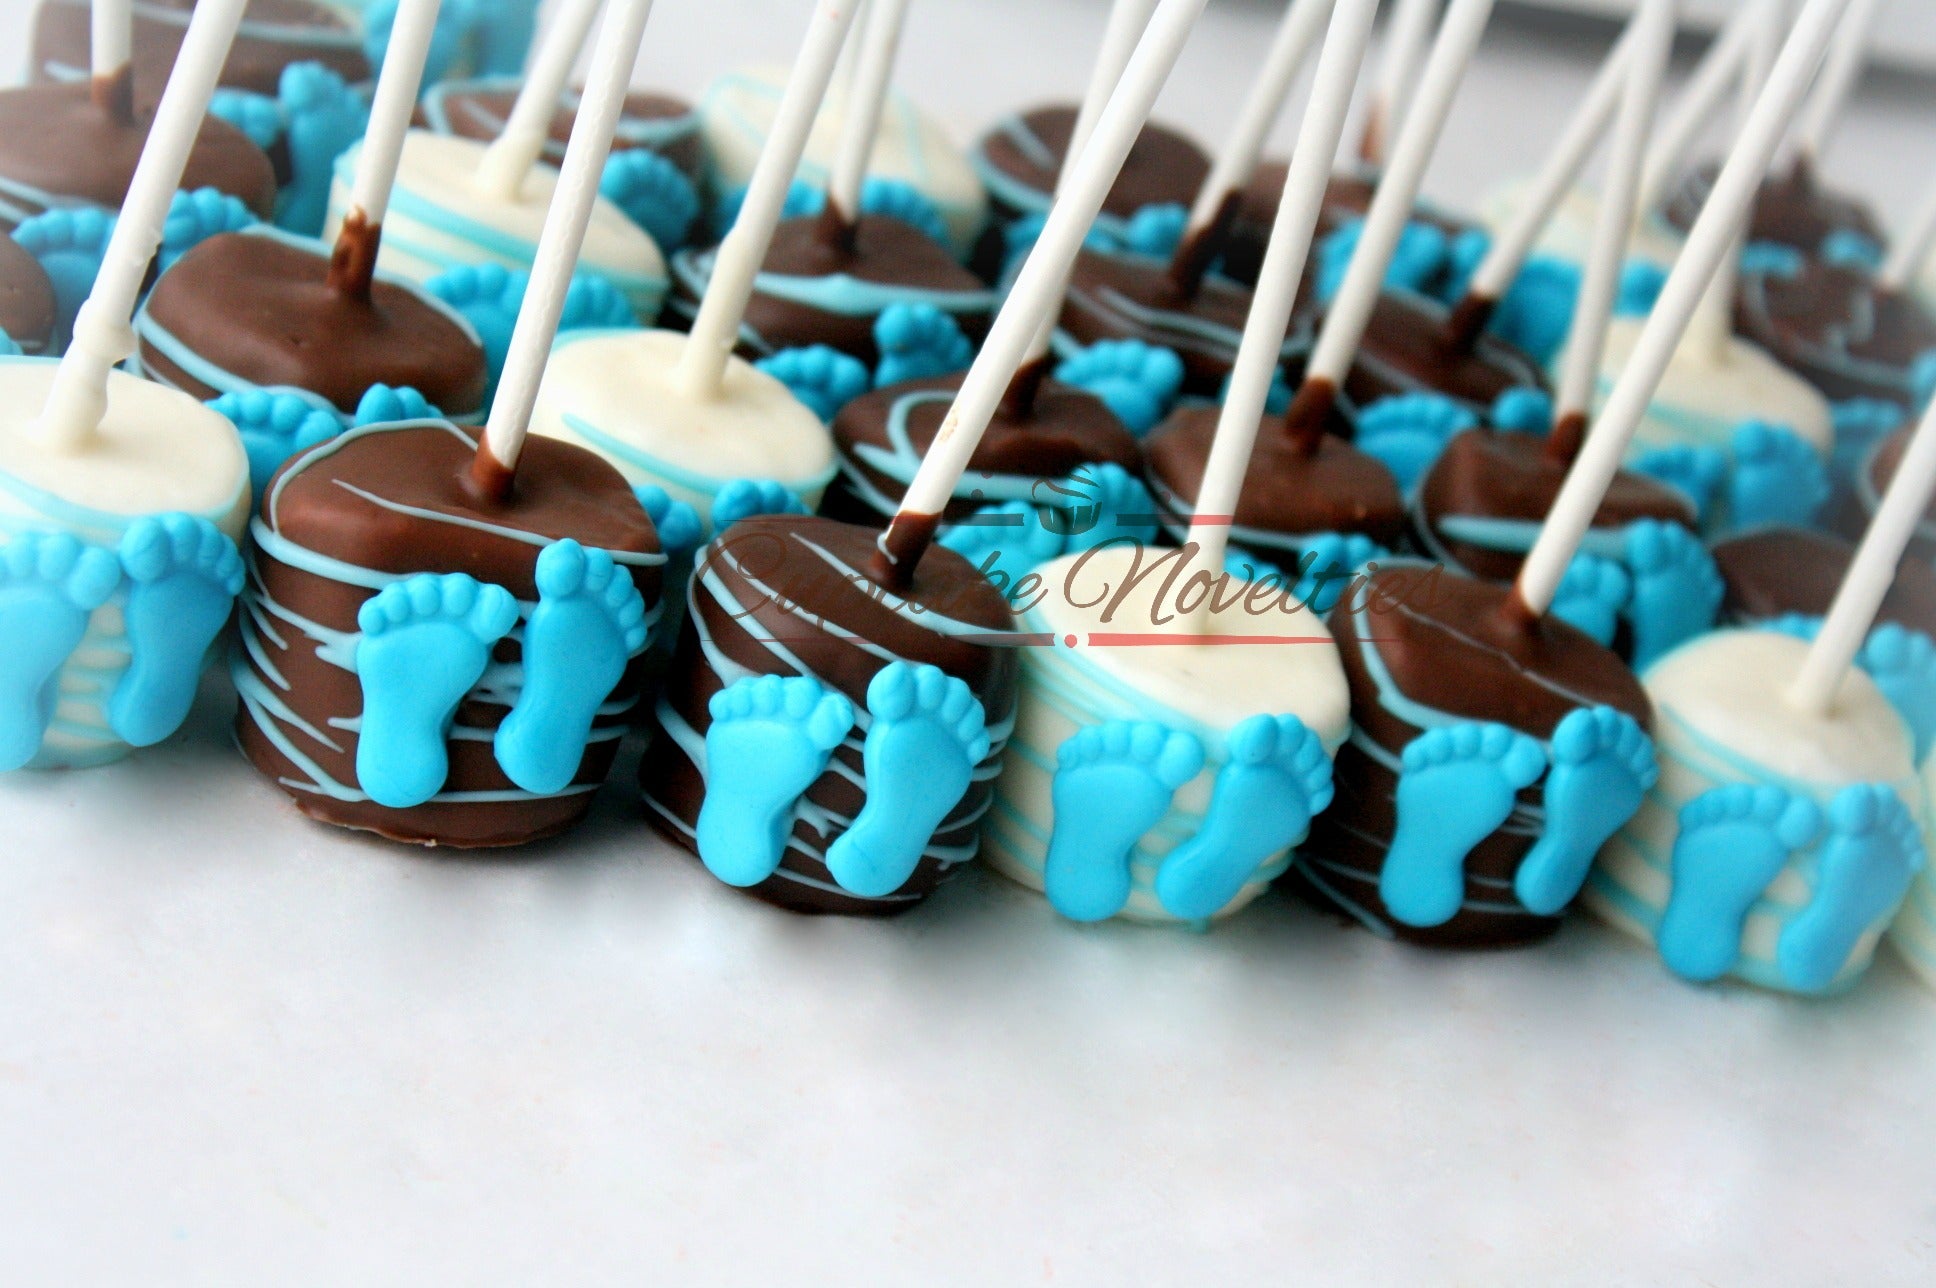 marshmallow decorations for baby shower